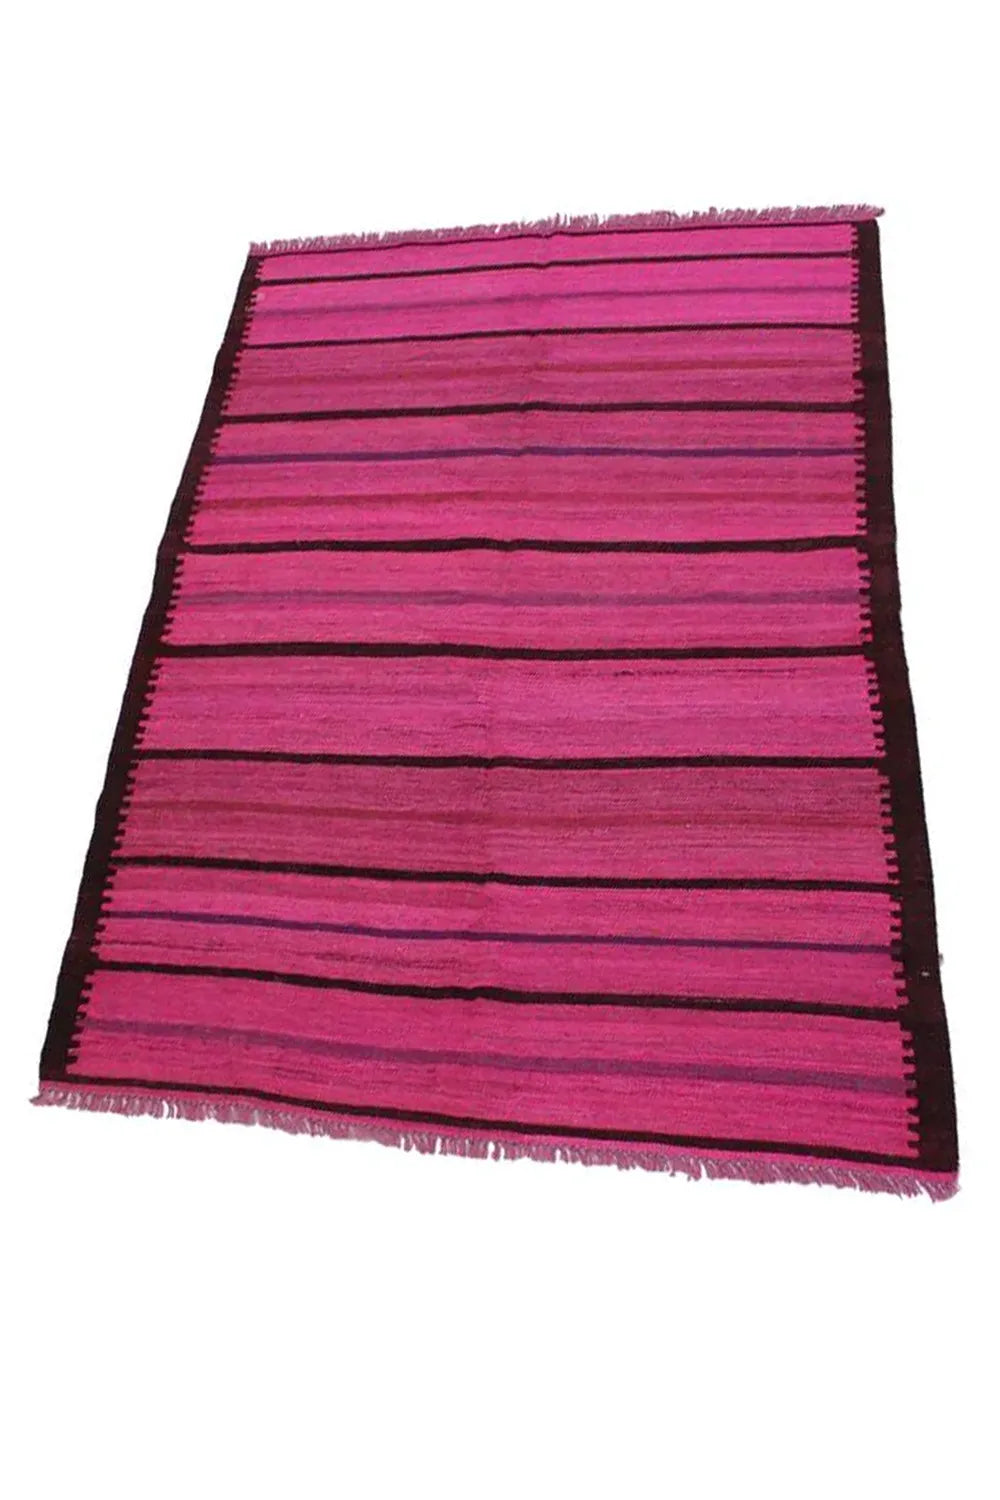 Funky Designer Pink Rug, Handwoven with Unique Patterns in Spacious 9x12 Size